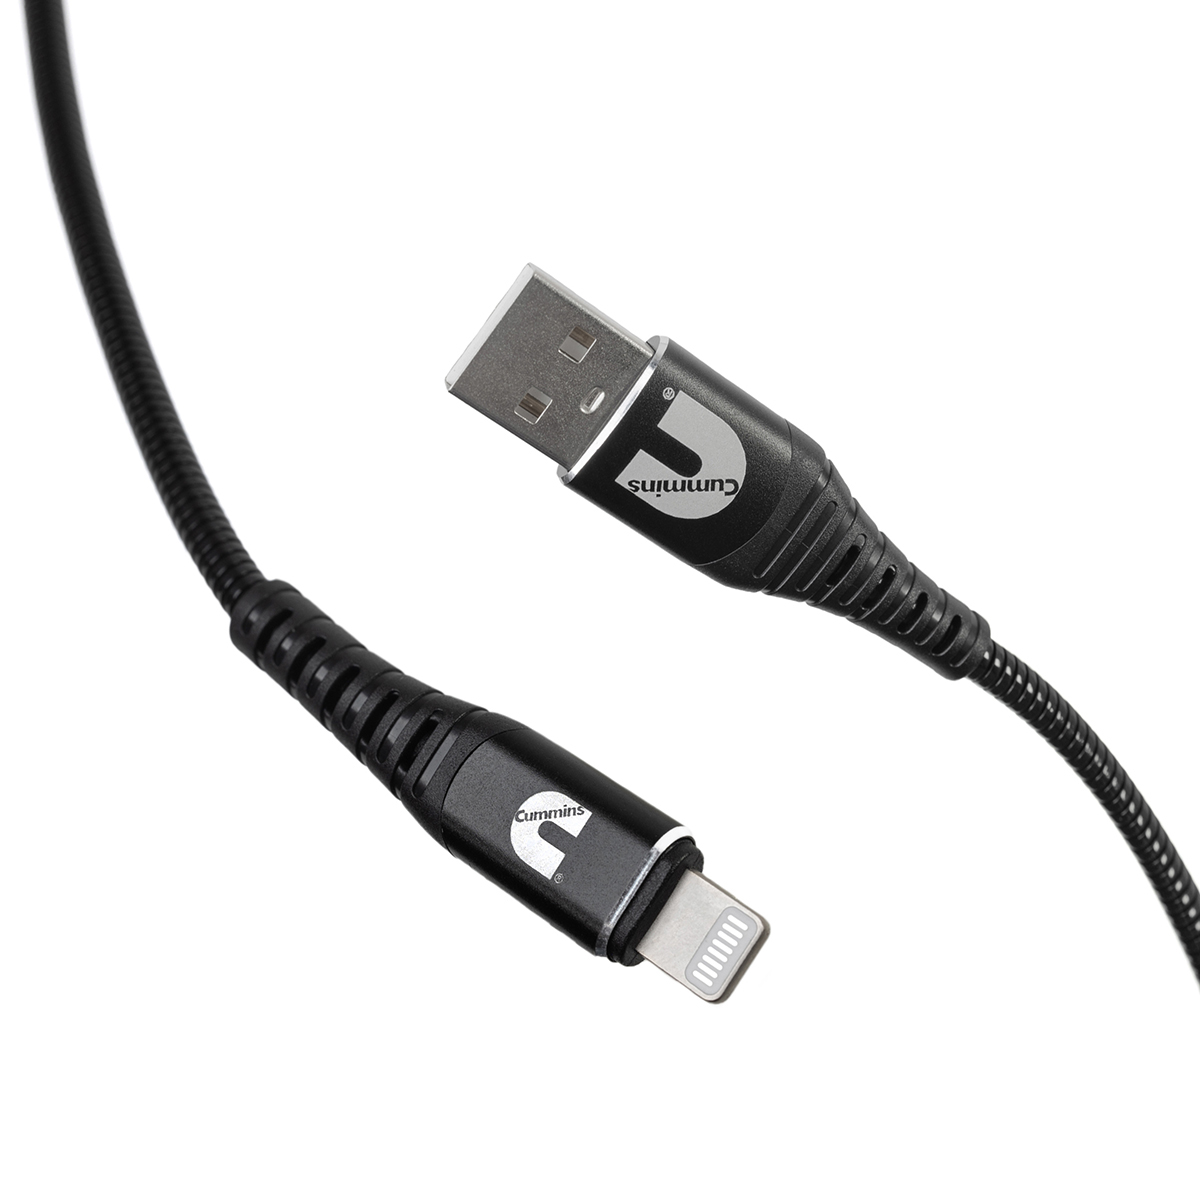 Cummins Flex USB to Lighting Cable for iPhone iPad and More 4ft MFI-Certified CMN4704